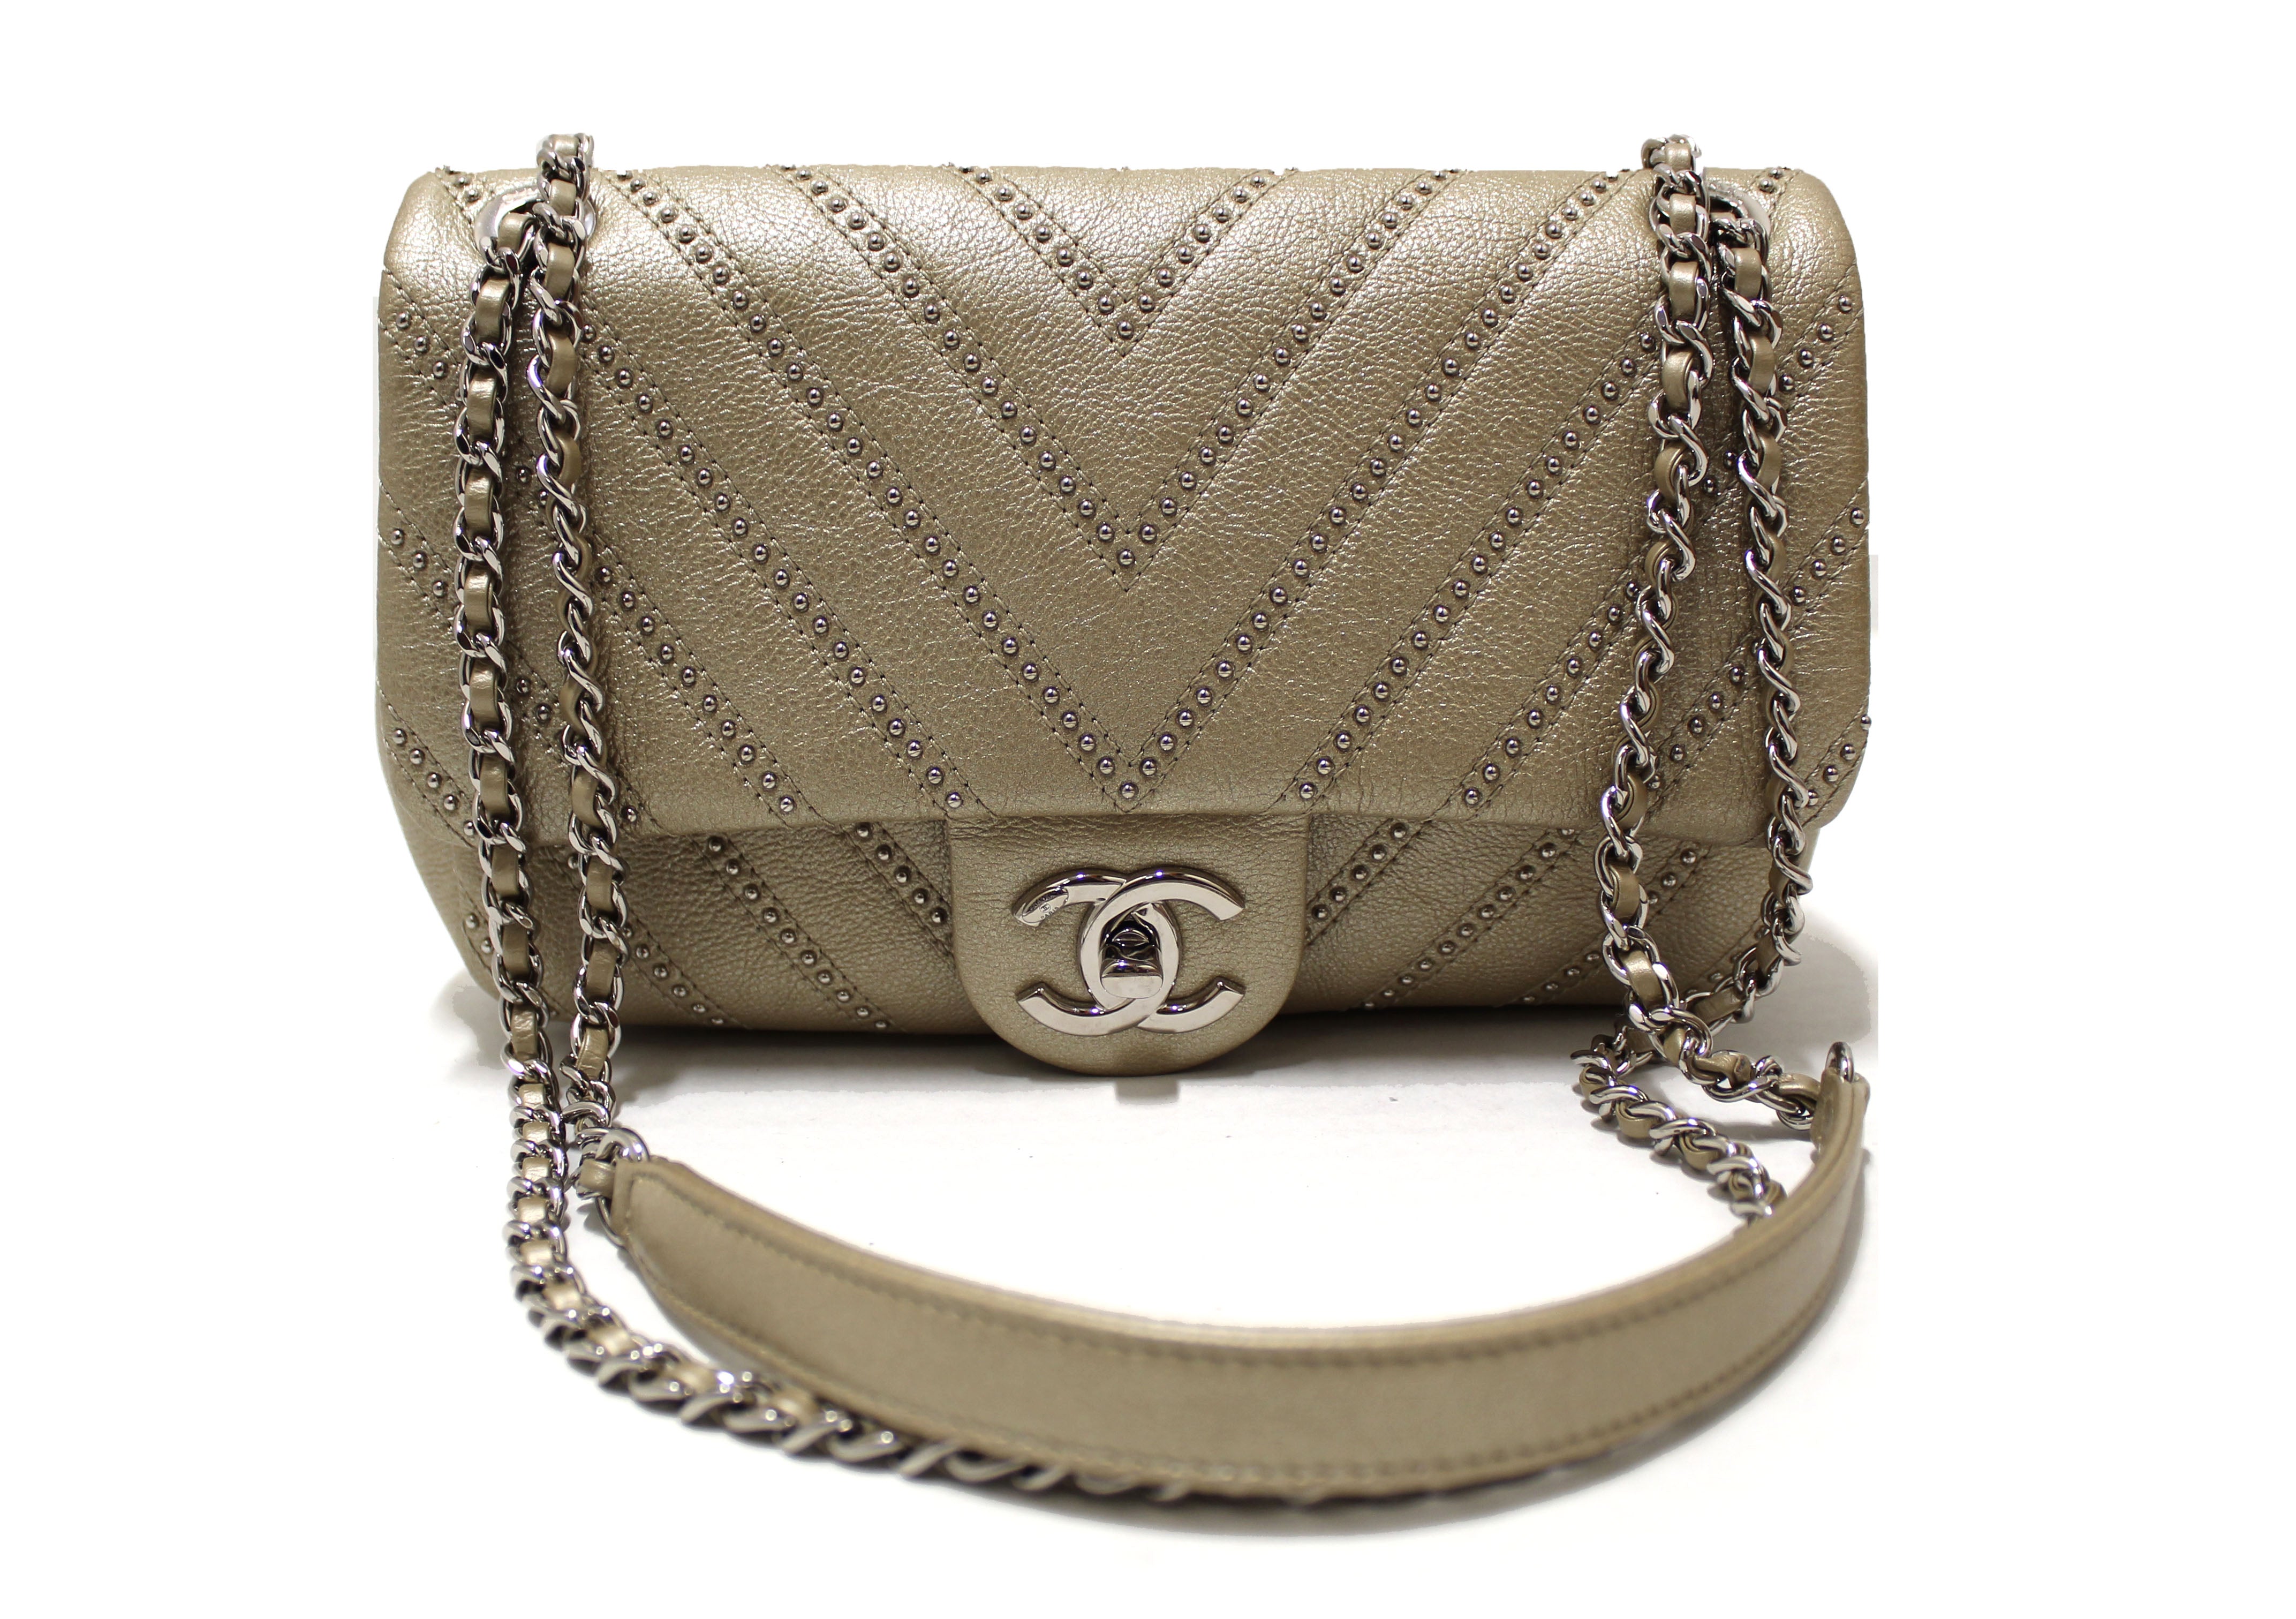 Authentic Chanel Gold Studs Calfskin Leather Mini Chevron Quilted Classic Shoulder Bag